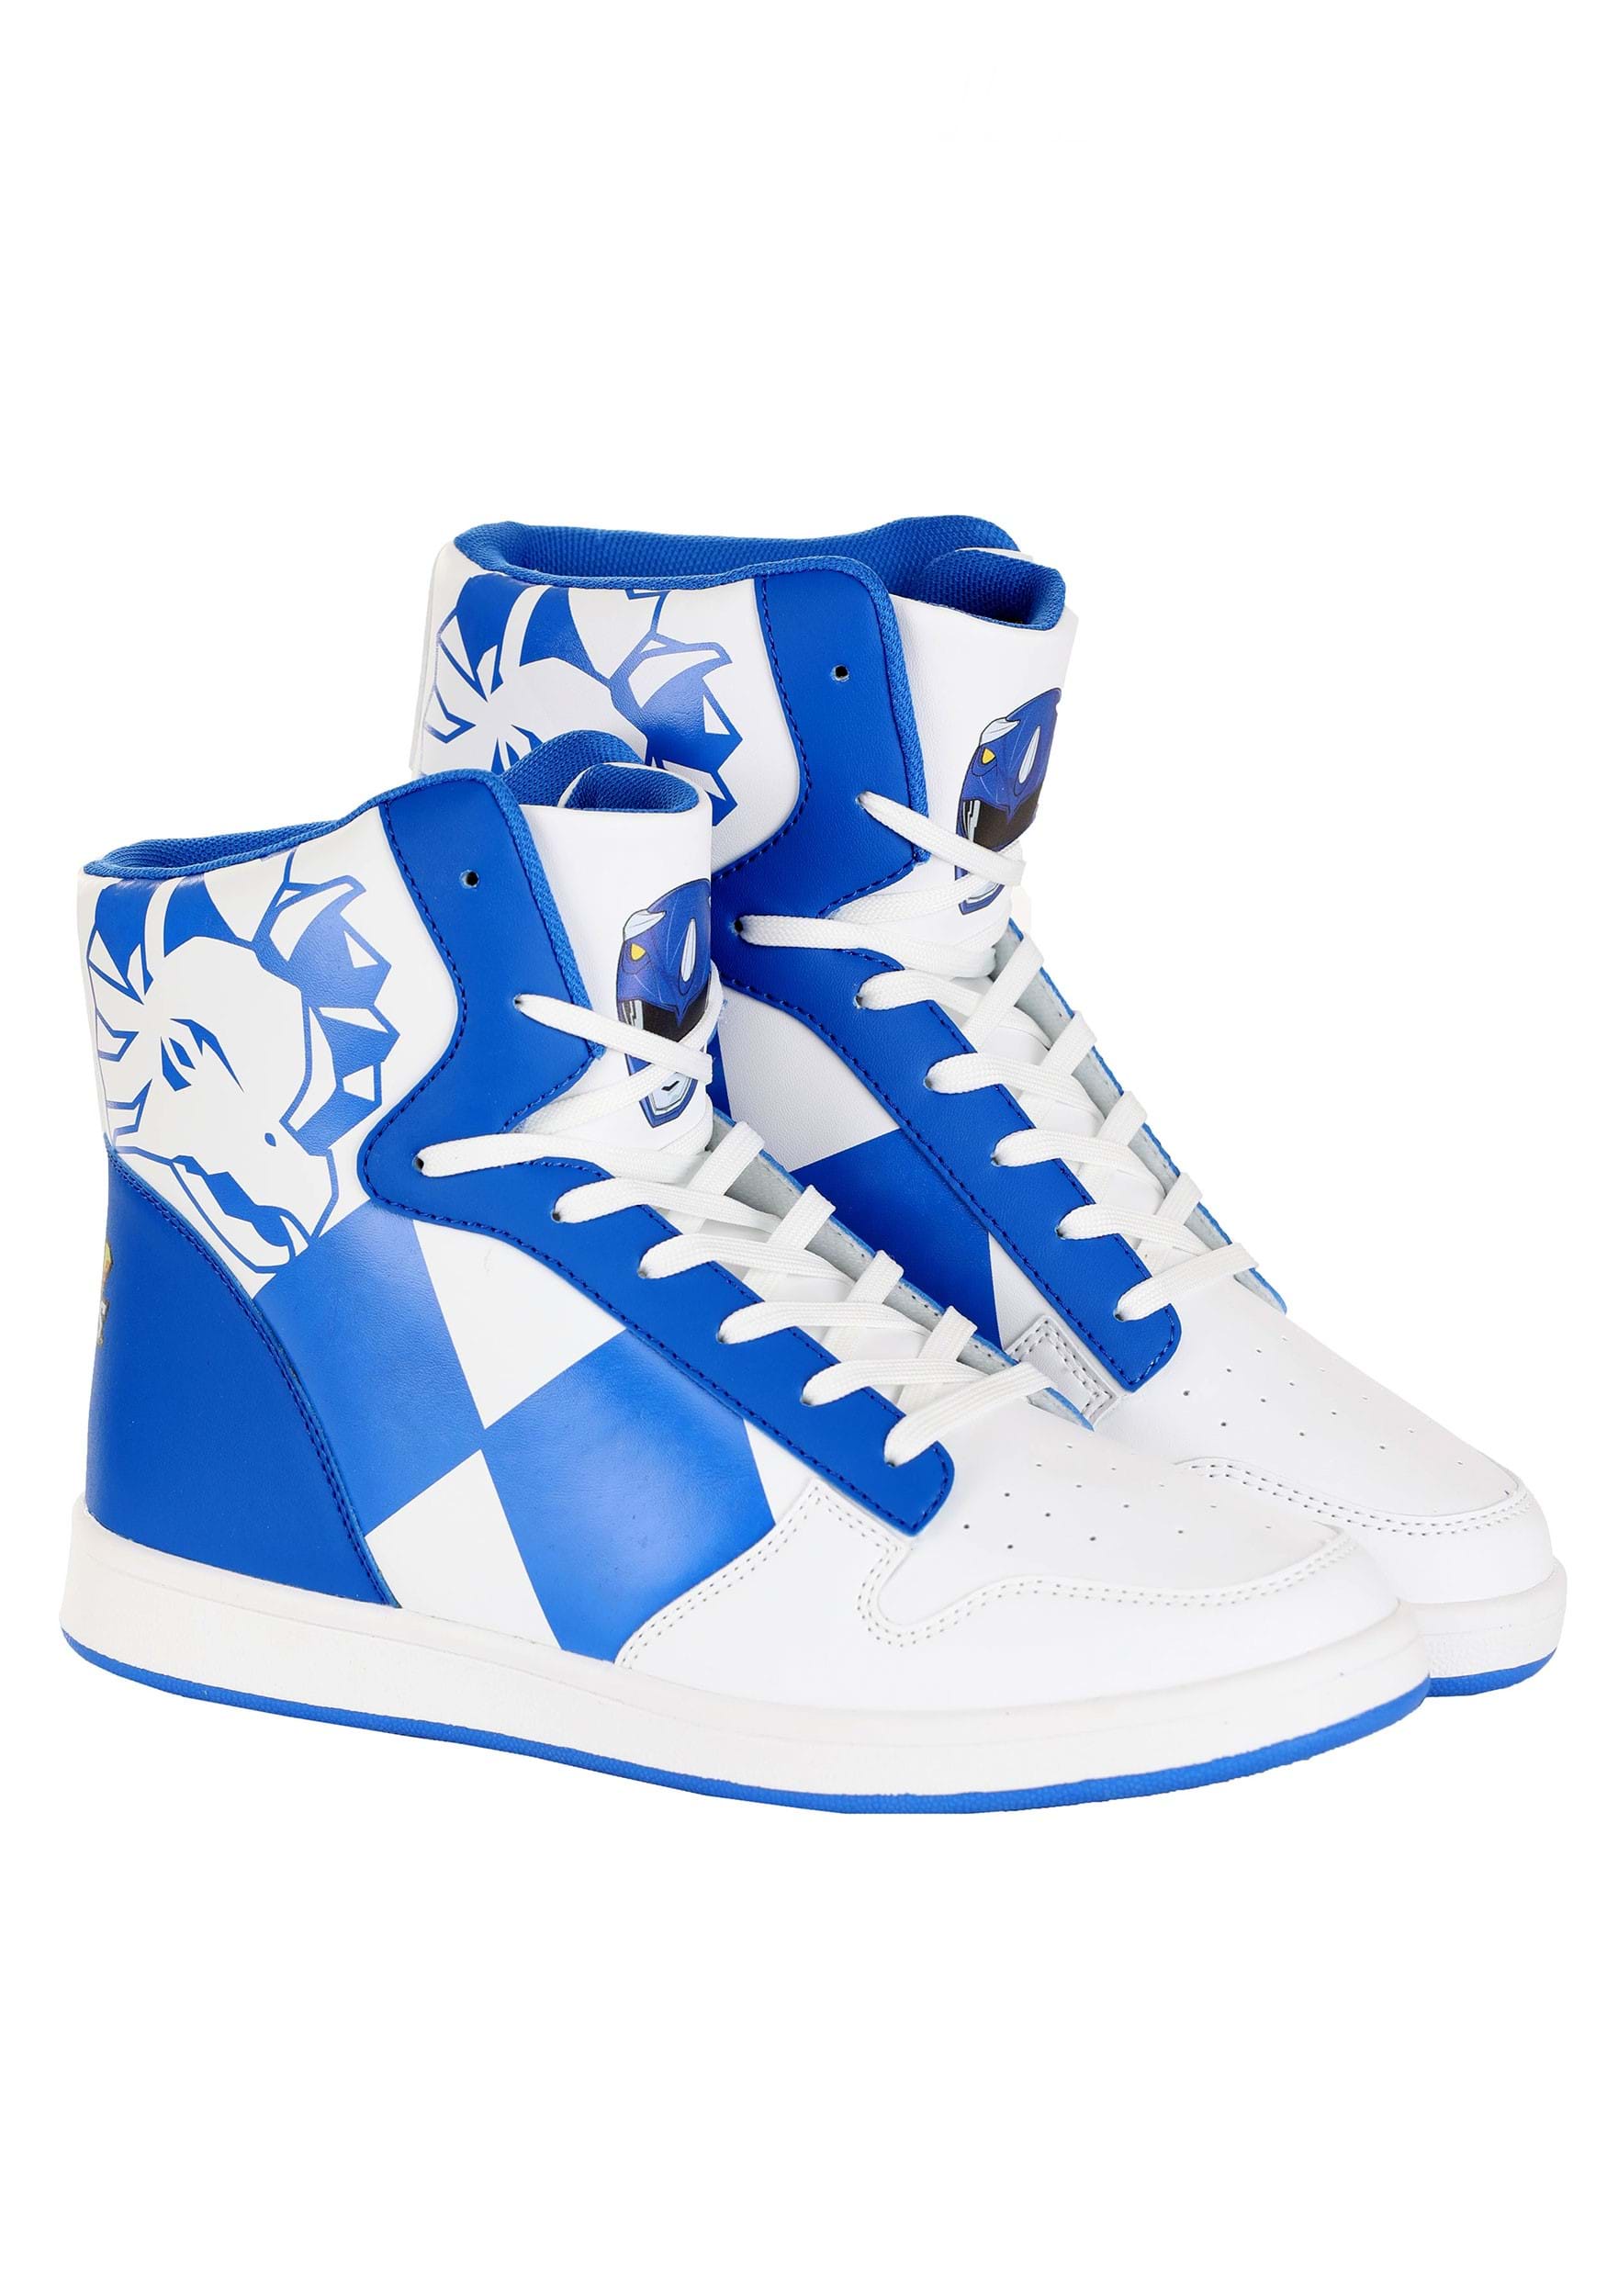 Blue Power Rangers Costume Inspired Sneakers for Adults